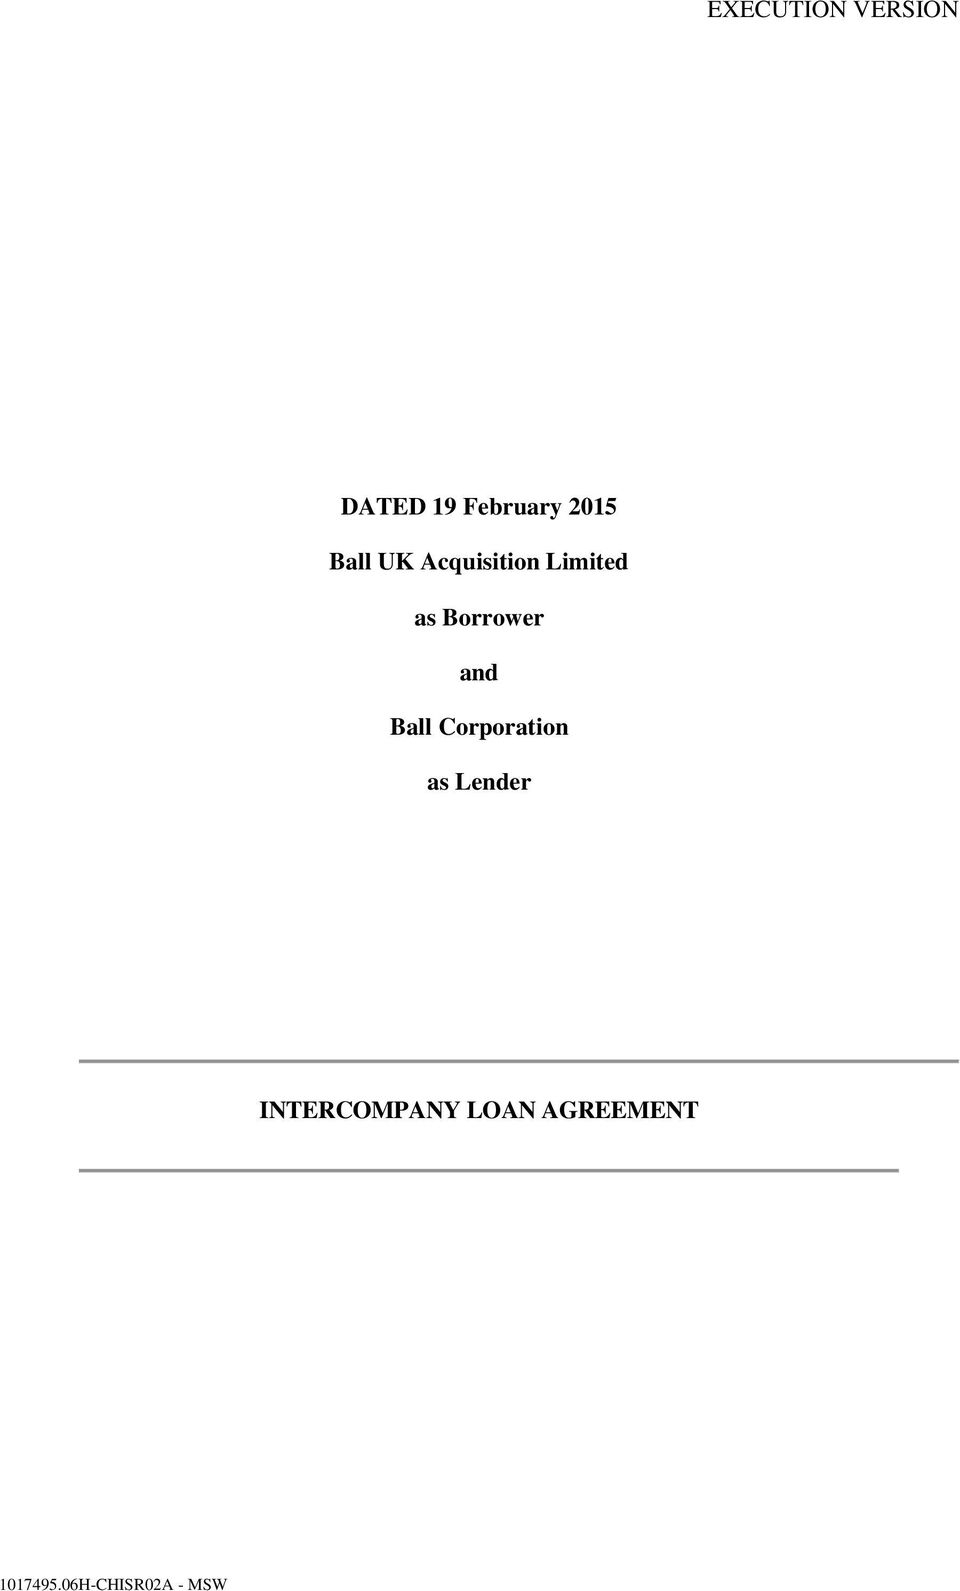 Intercompany Loan Agreement Dated 19 February Ball Uk Acquisition Limited As Borrower And